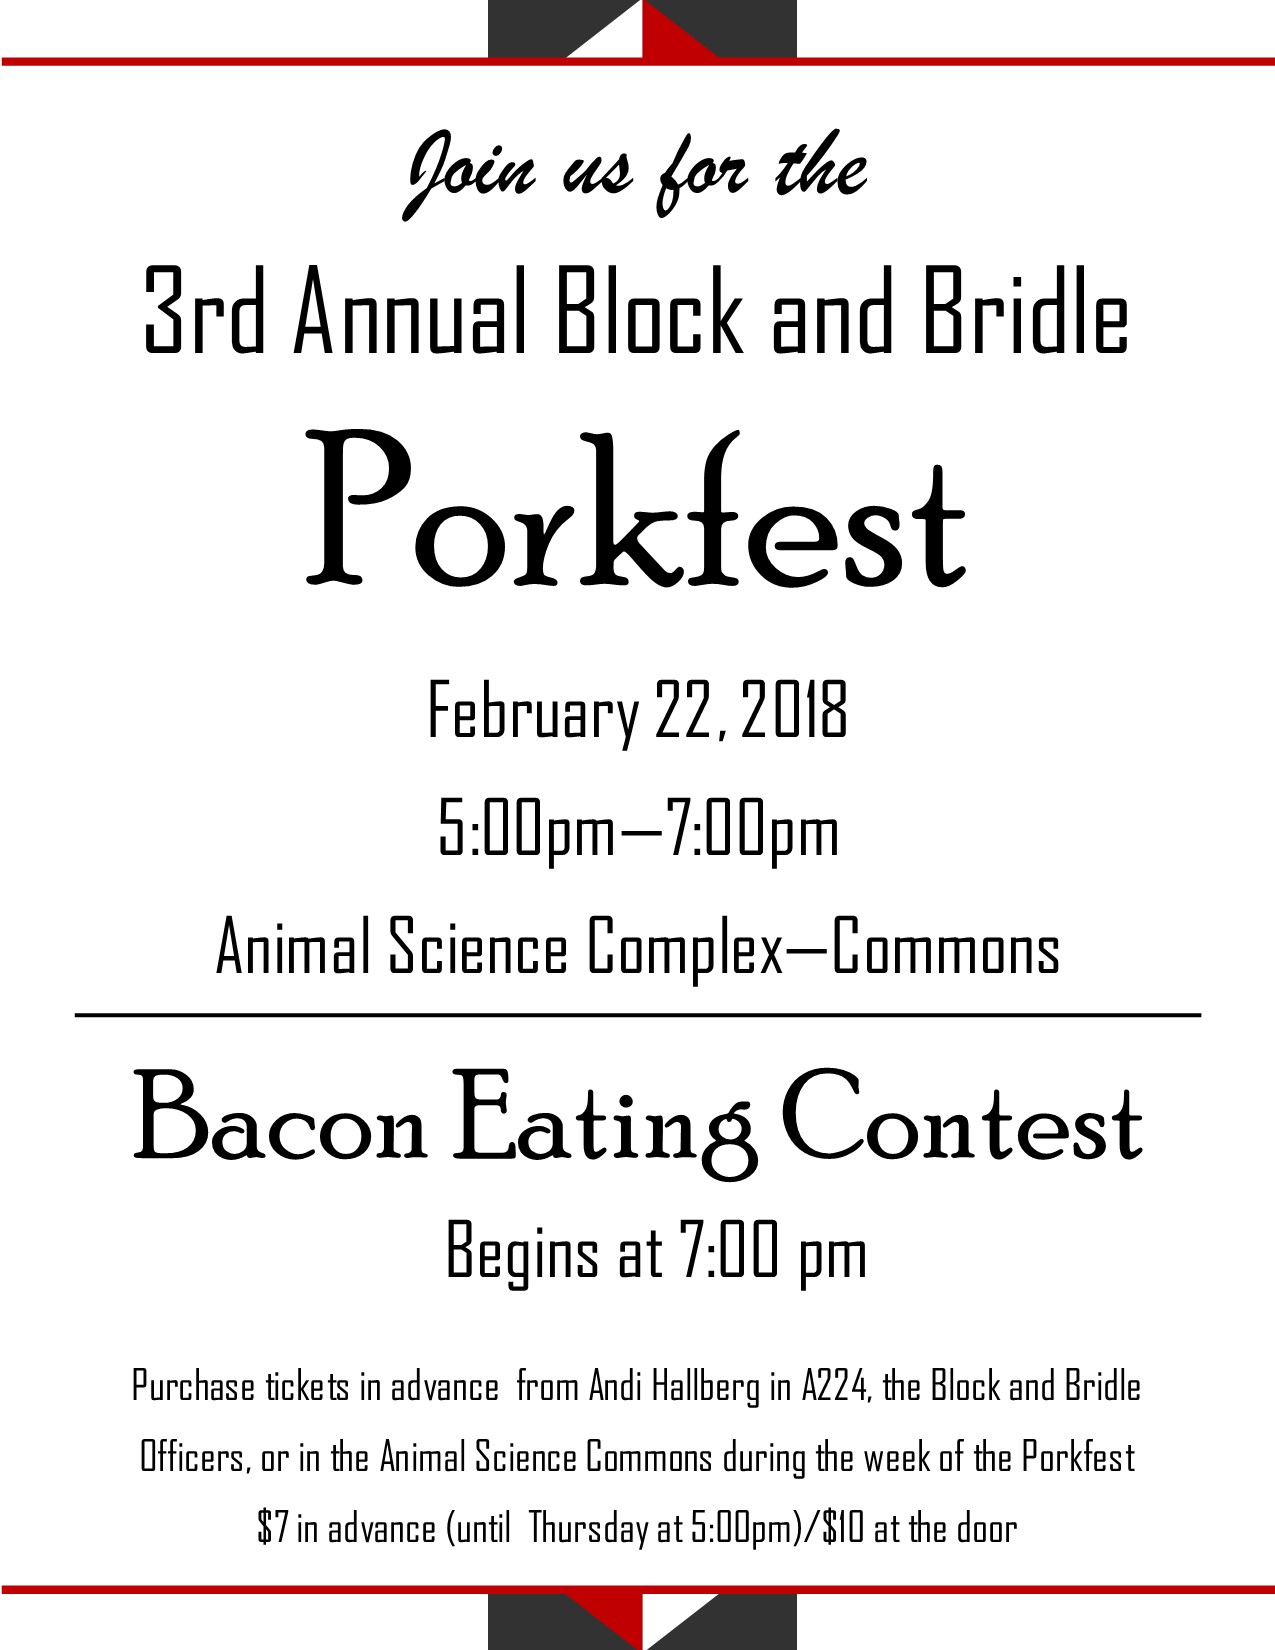 The flyer for the 3rd Annual Block and Bridle Porkfest